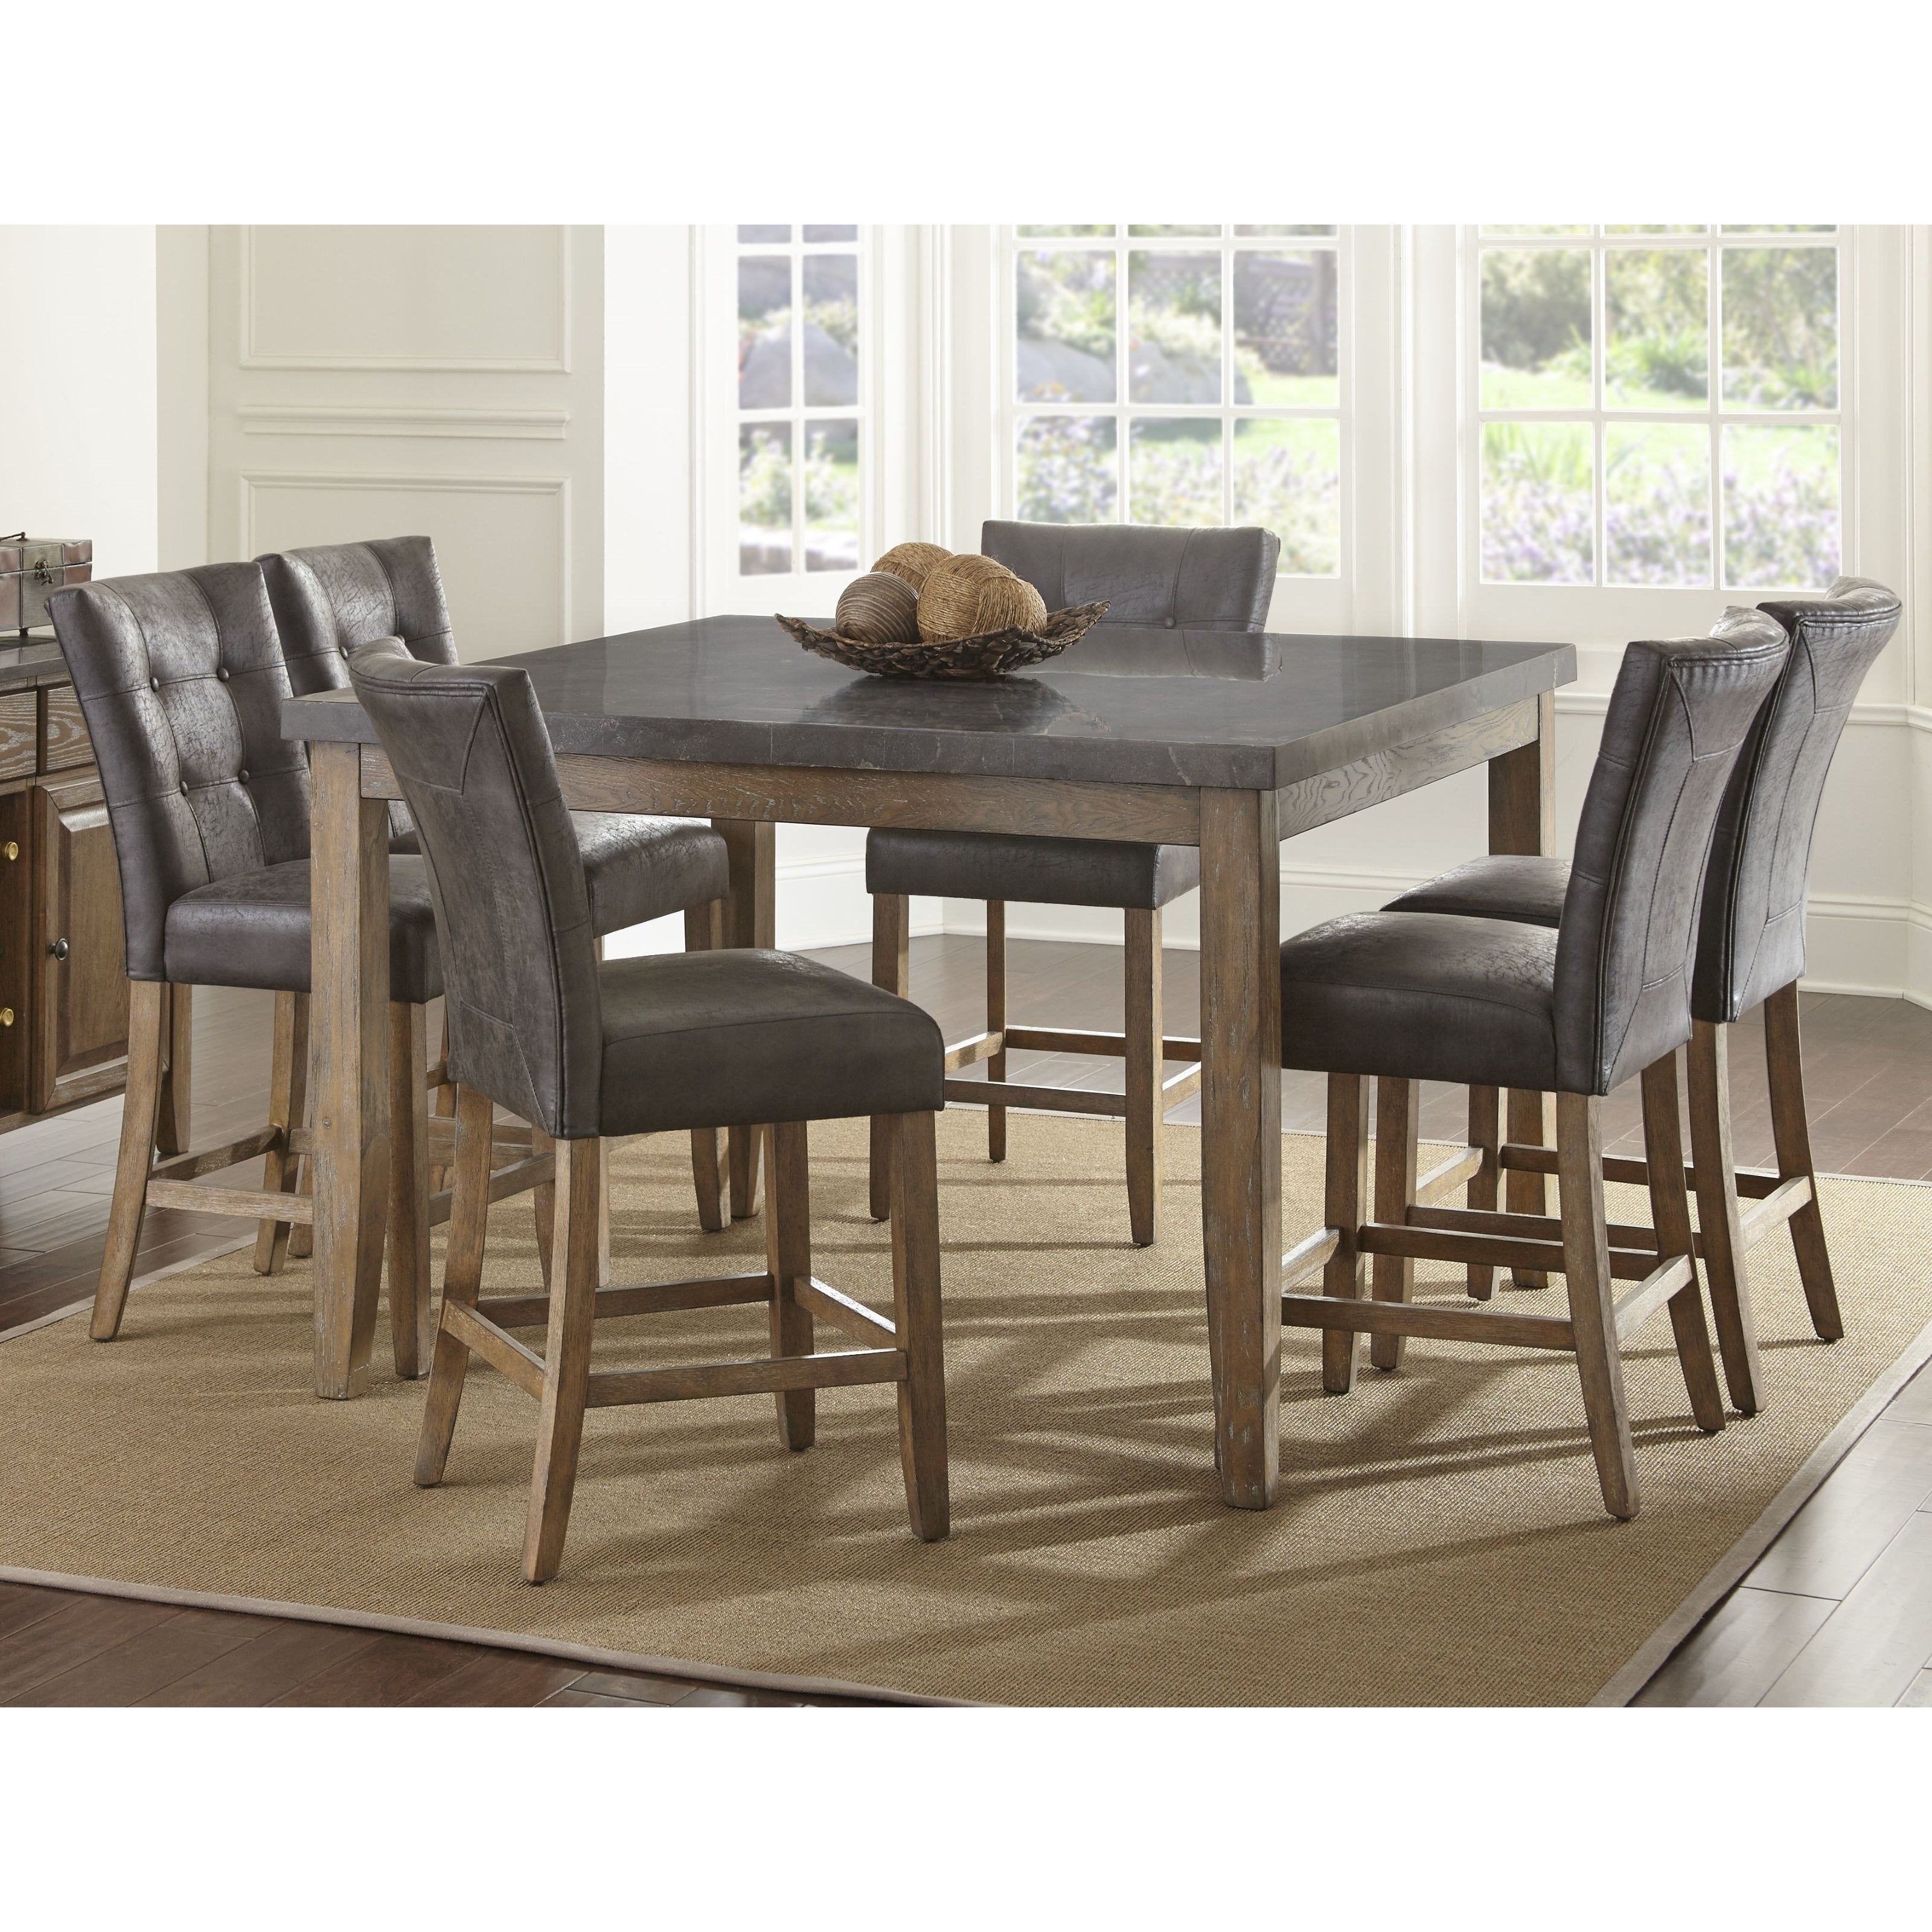 Autberry 5 Piece Dining Sets In Most Recently Released Buy 7 Piece Sets Kitchen & Dining Room Sets Online At Overstock (View 20 of 20)